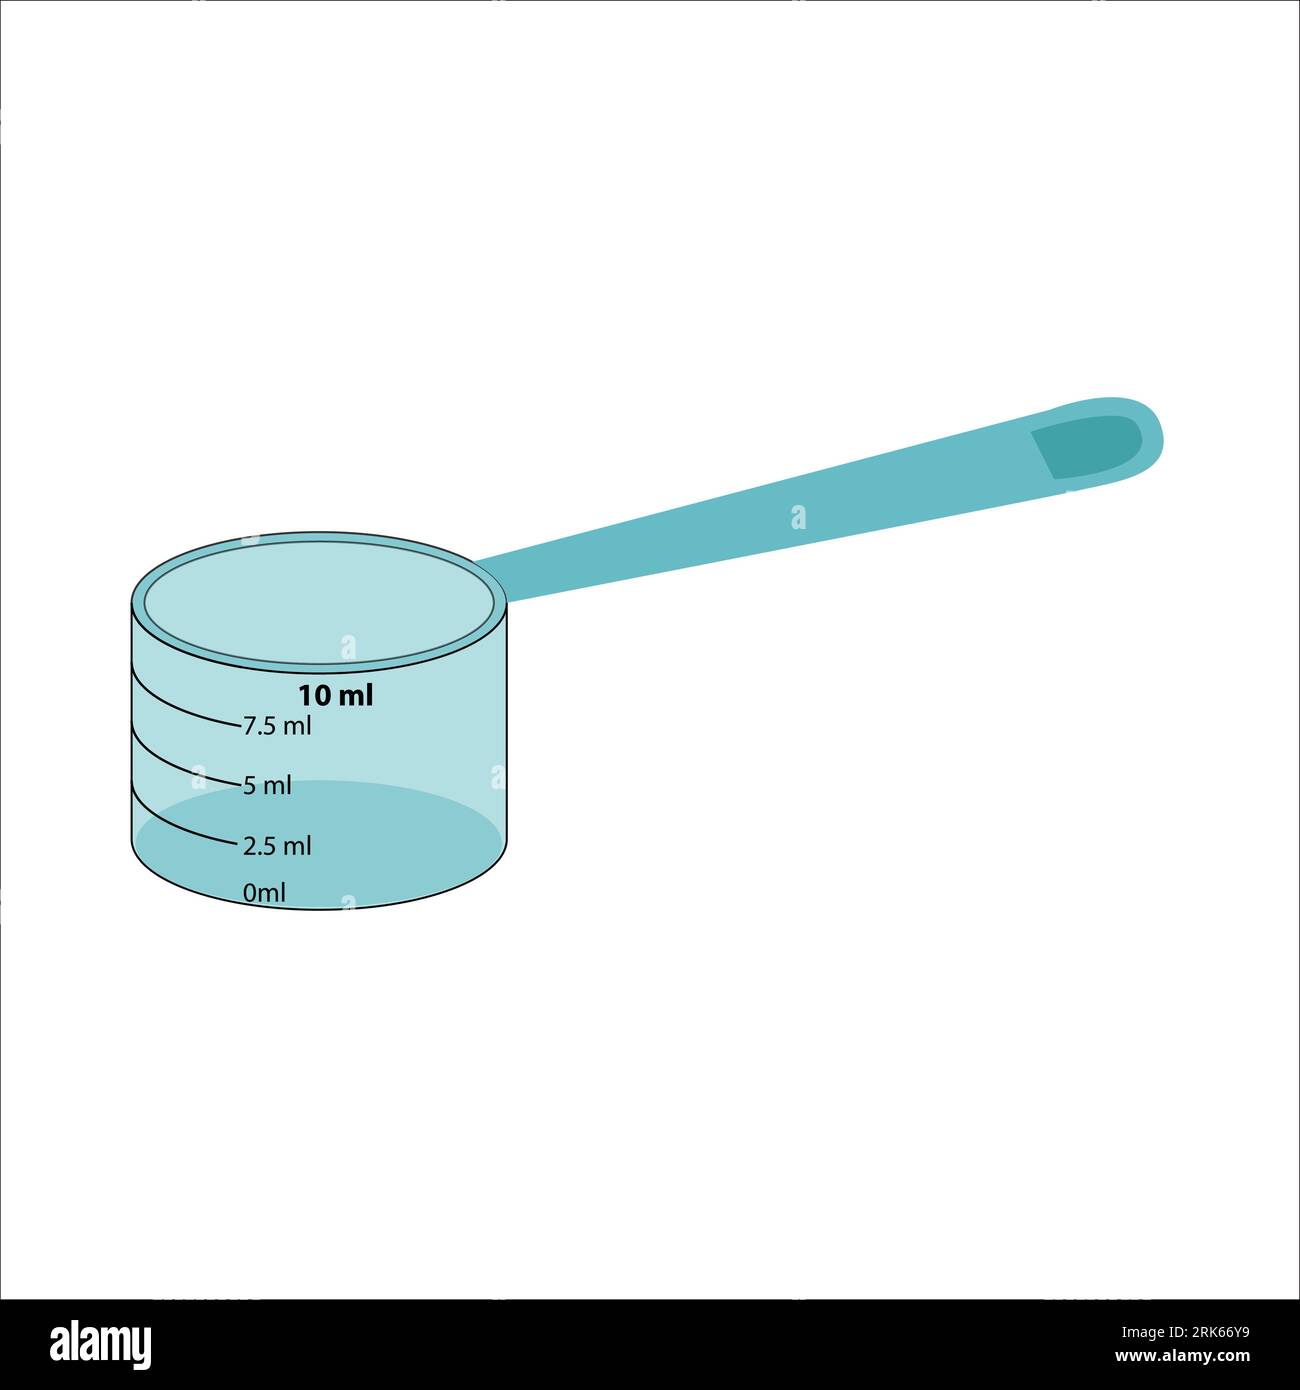 https://c8.alamy.com/comp/2RK66Y9/a-vector-drawing-of-a-10-ml-measuring-cup-liquid-measurement-capability-in-a-concise-design-on-white-background-2RK66Y9.jpg